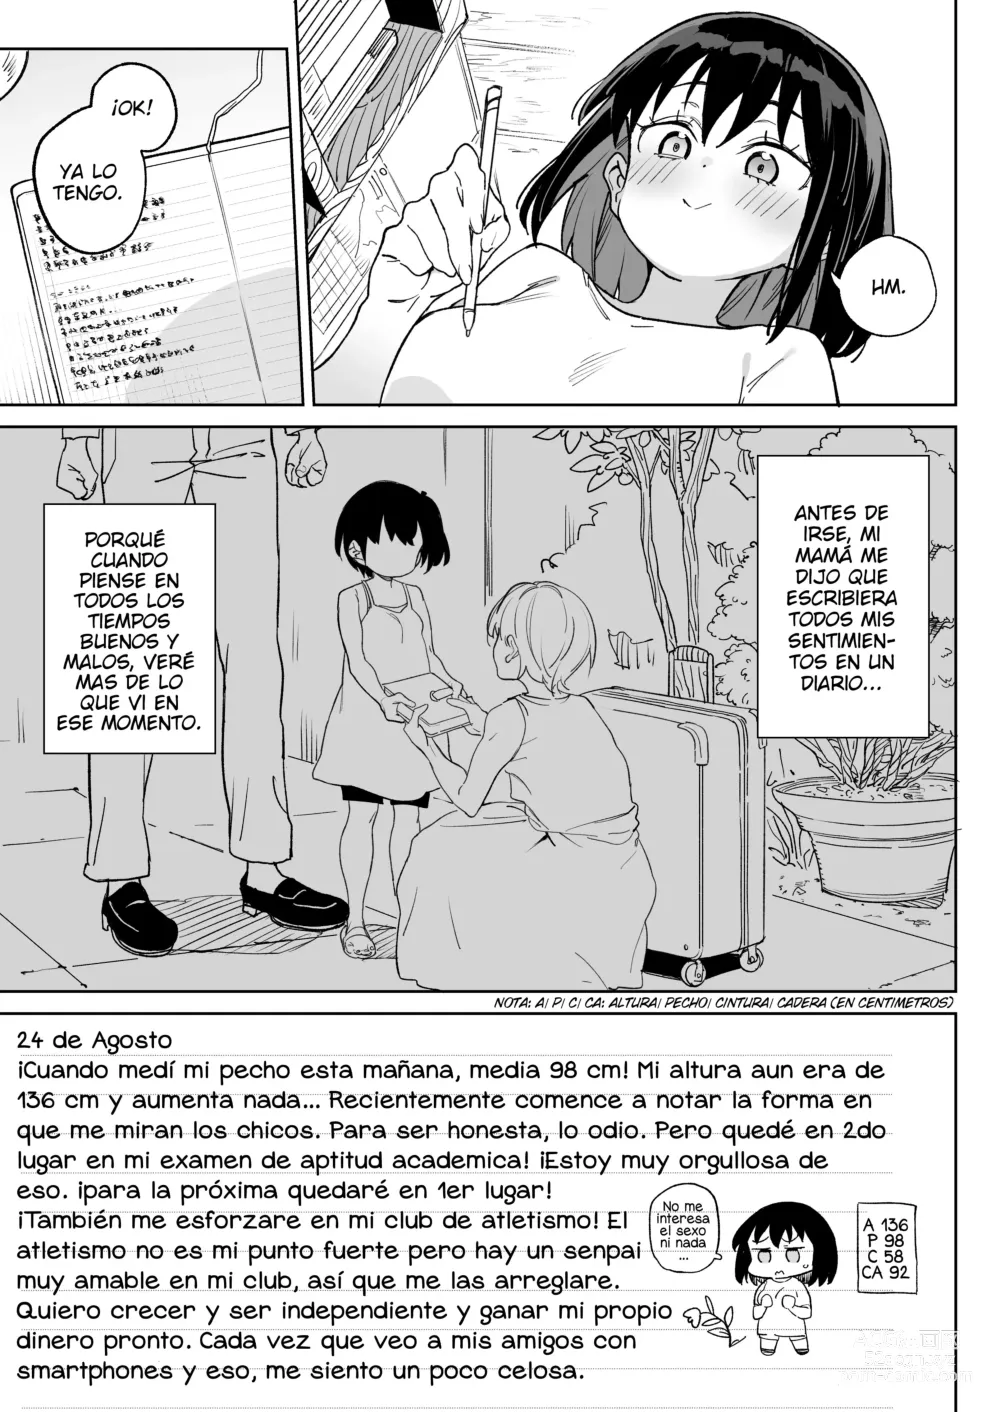 Page 2 of doujinshi November 28th: As of today, I belong to my new daddy!